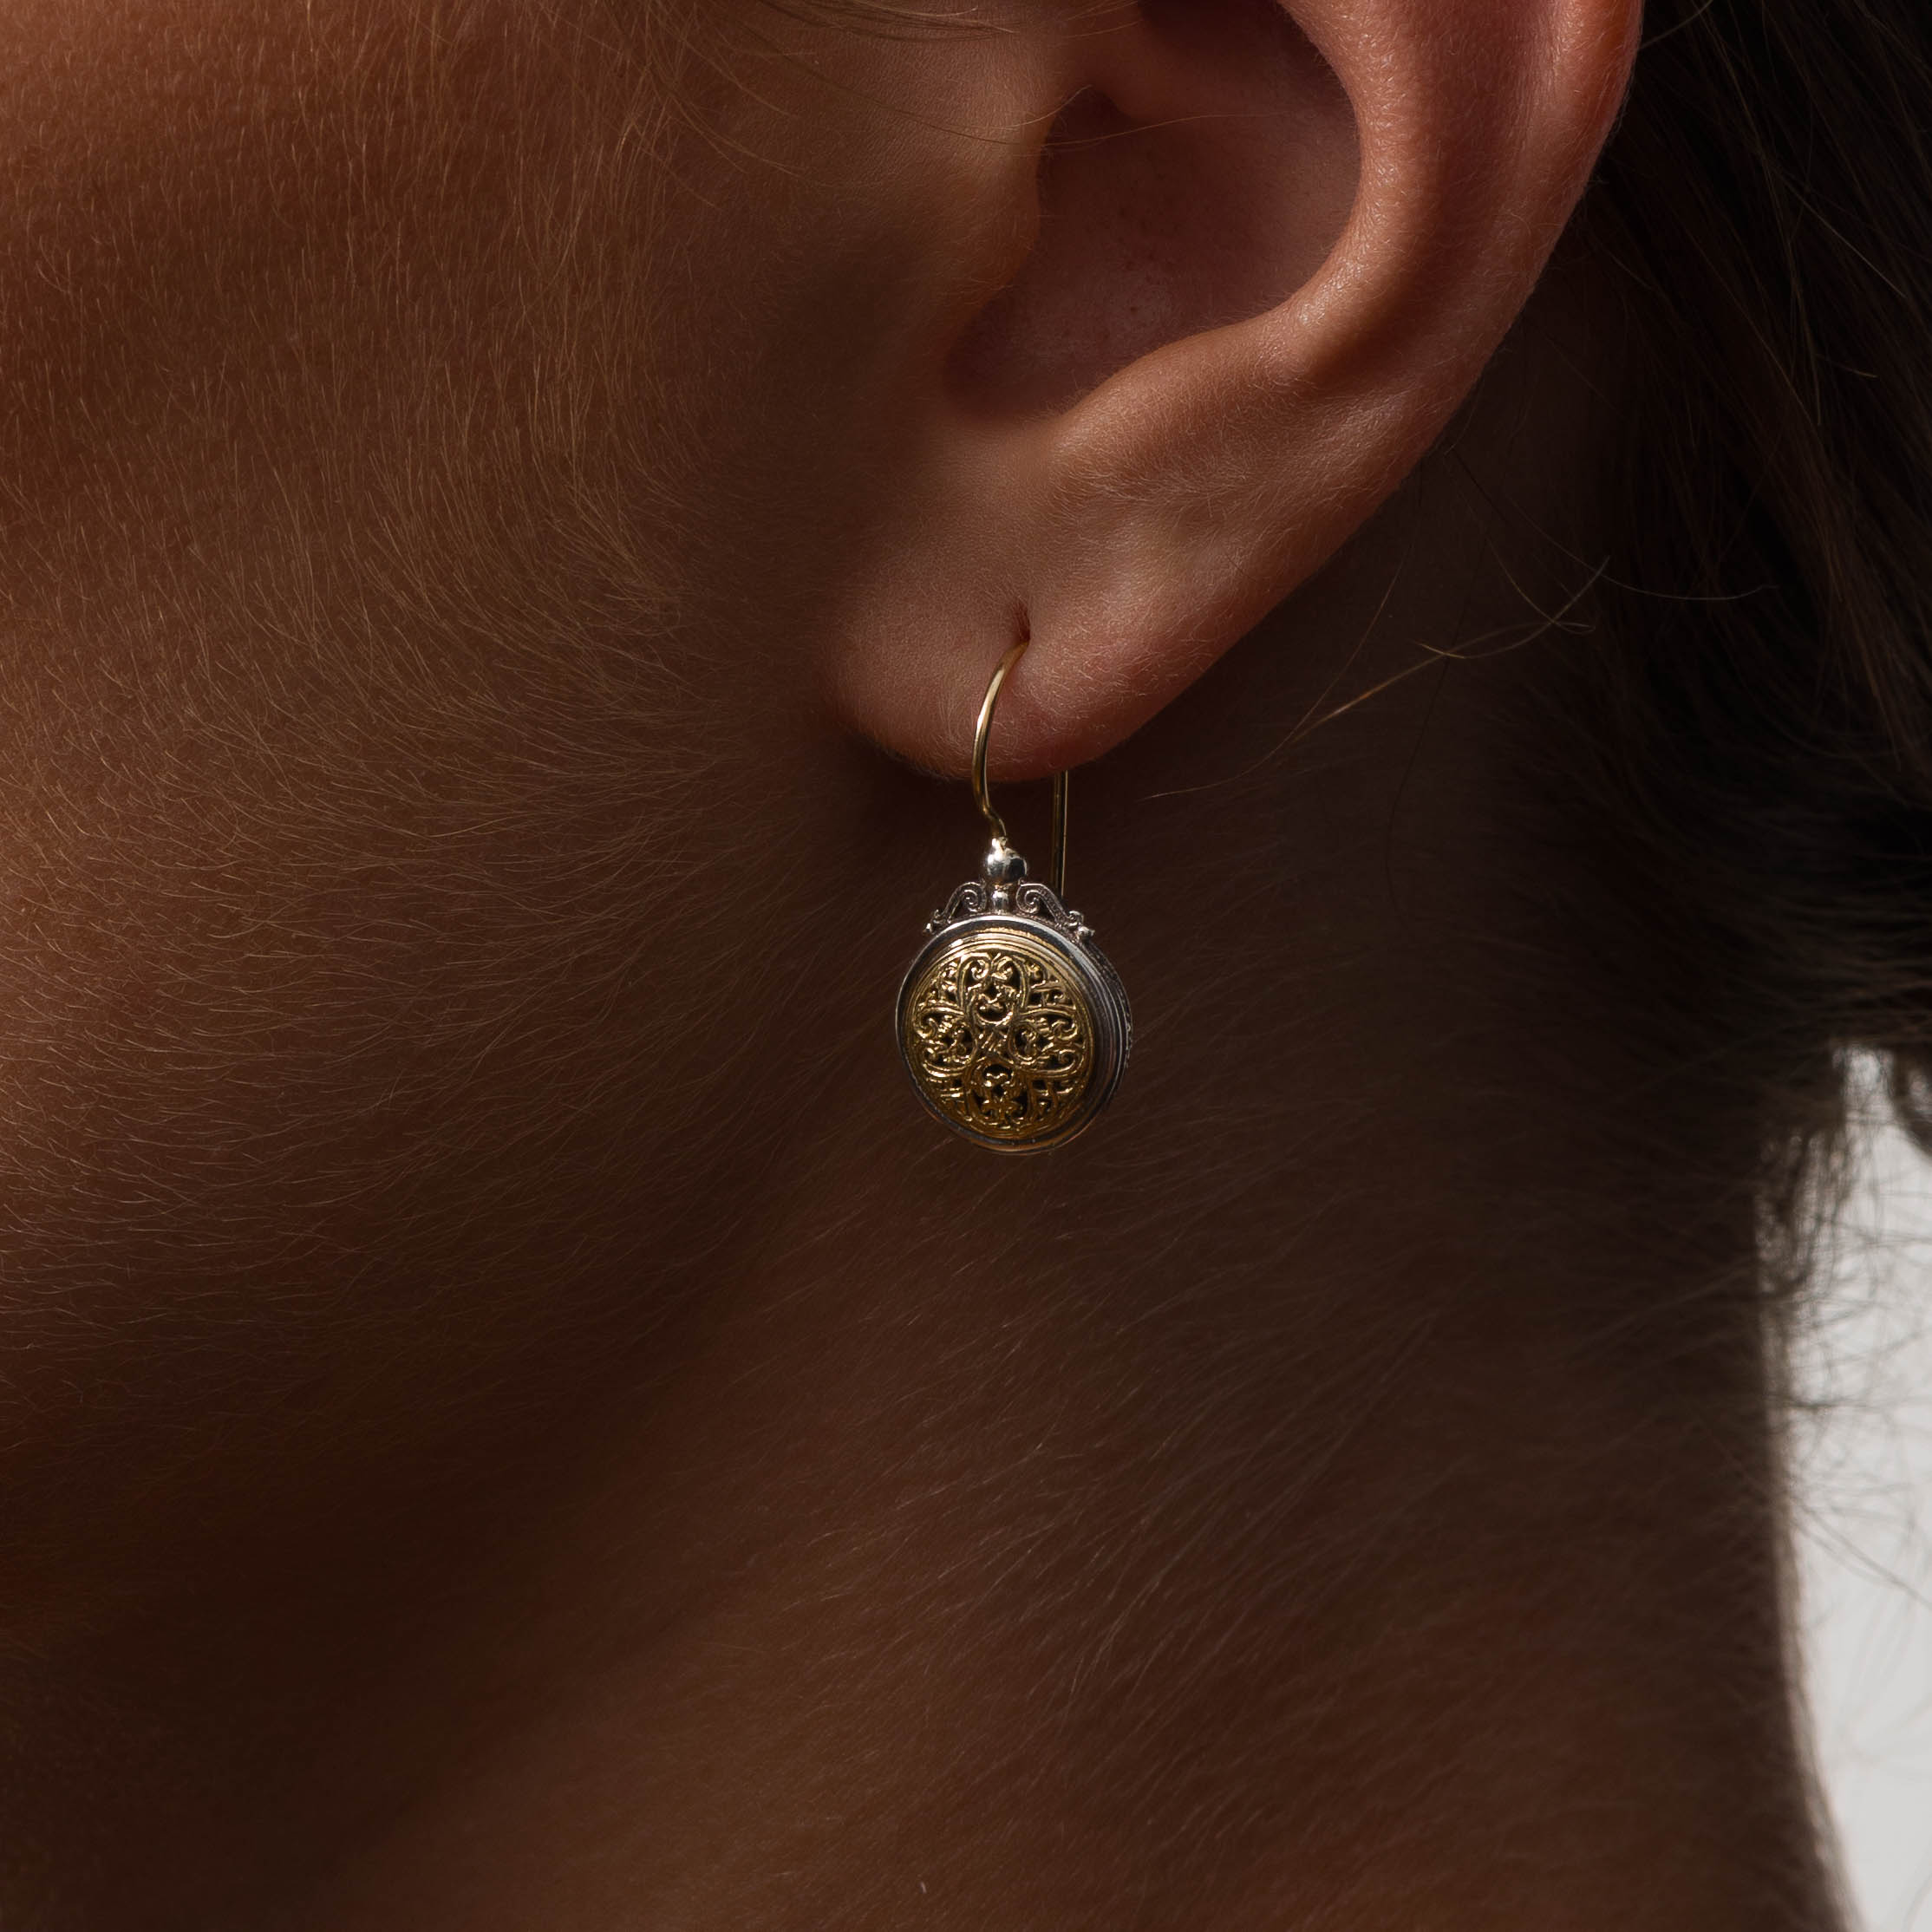 Mediterranean small round earrings in 18K Gold and Sterling Silver